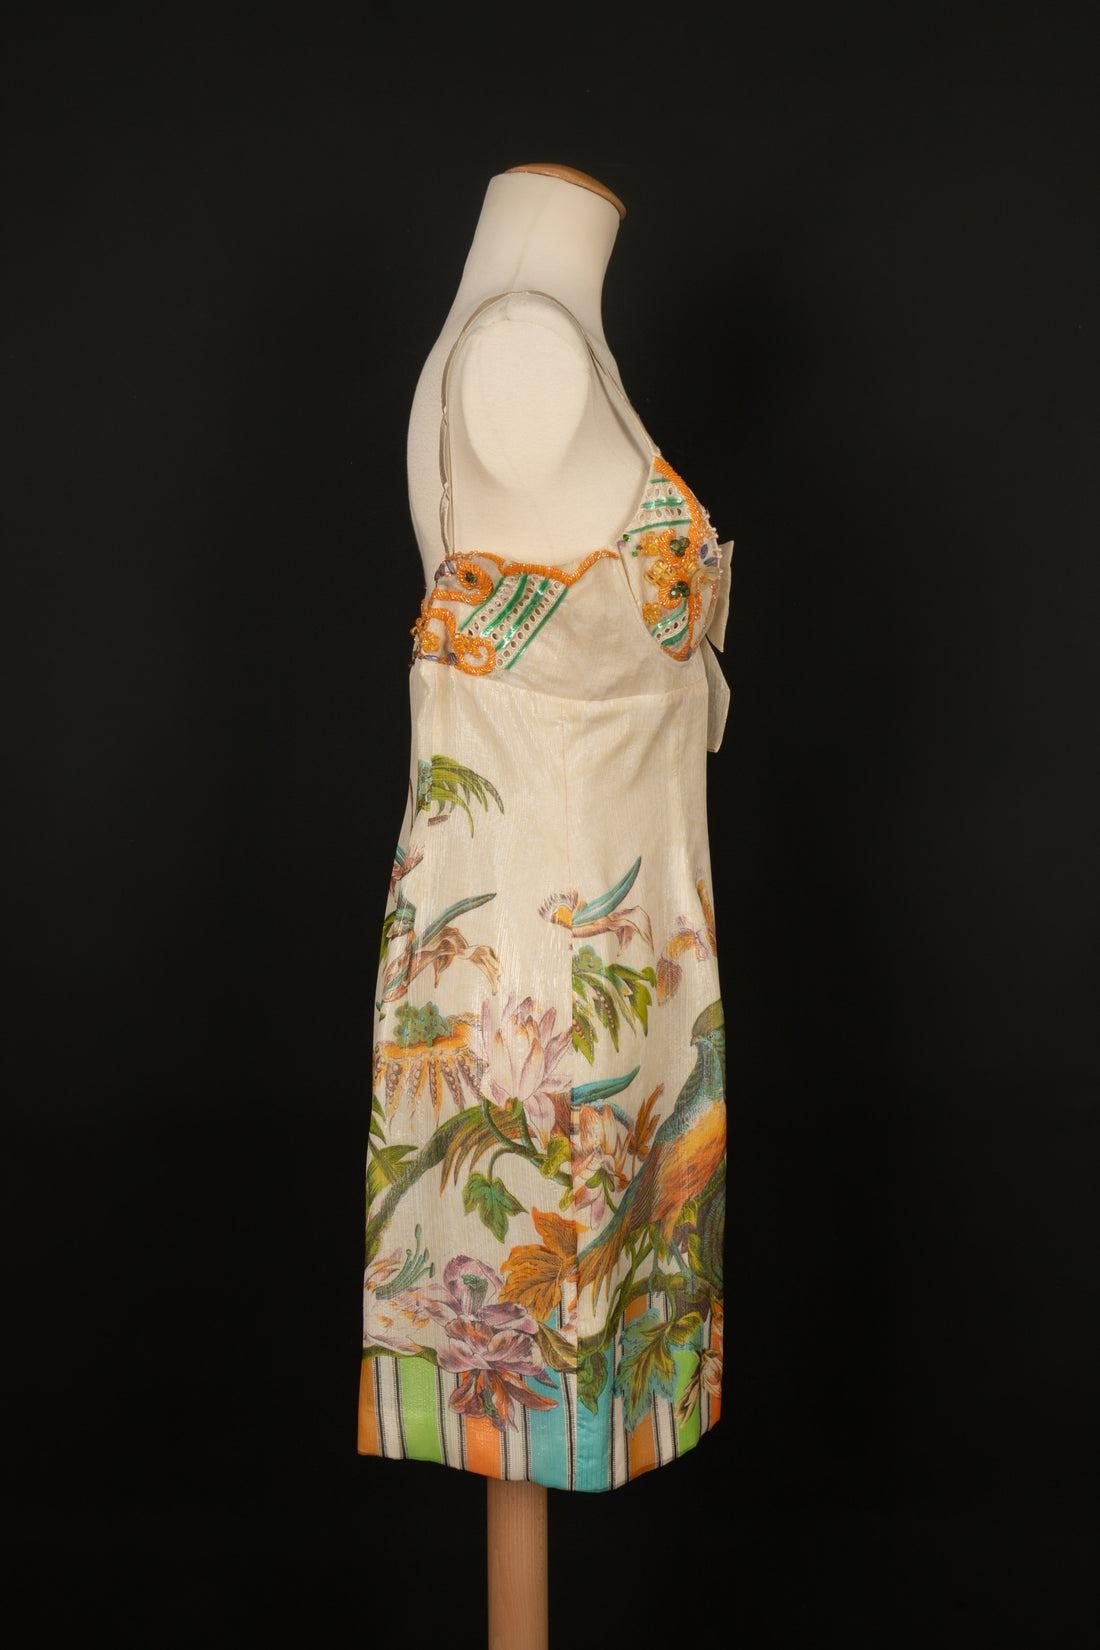 Dior - (Made in France) Silk dress embroidered with costume pearls. Indicated size 42FR.

Additional information:
Condition: Very good condition
Dimensions: Chest: 42 cm - Waist: 34 cm - Length: 75 cm

Seller Reference: VR237
